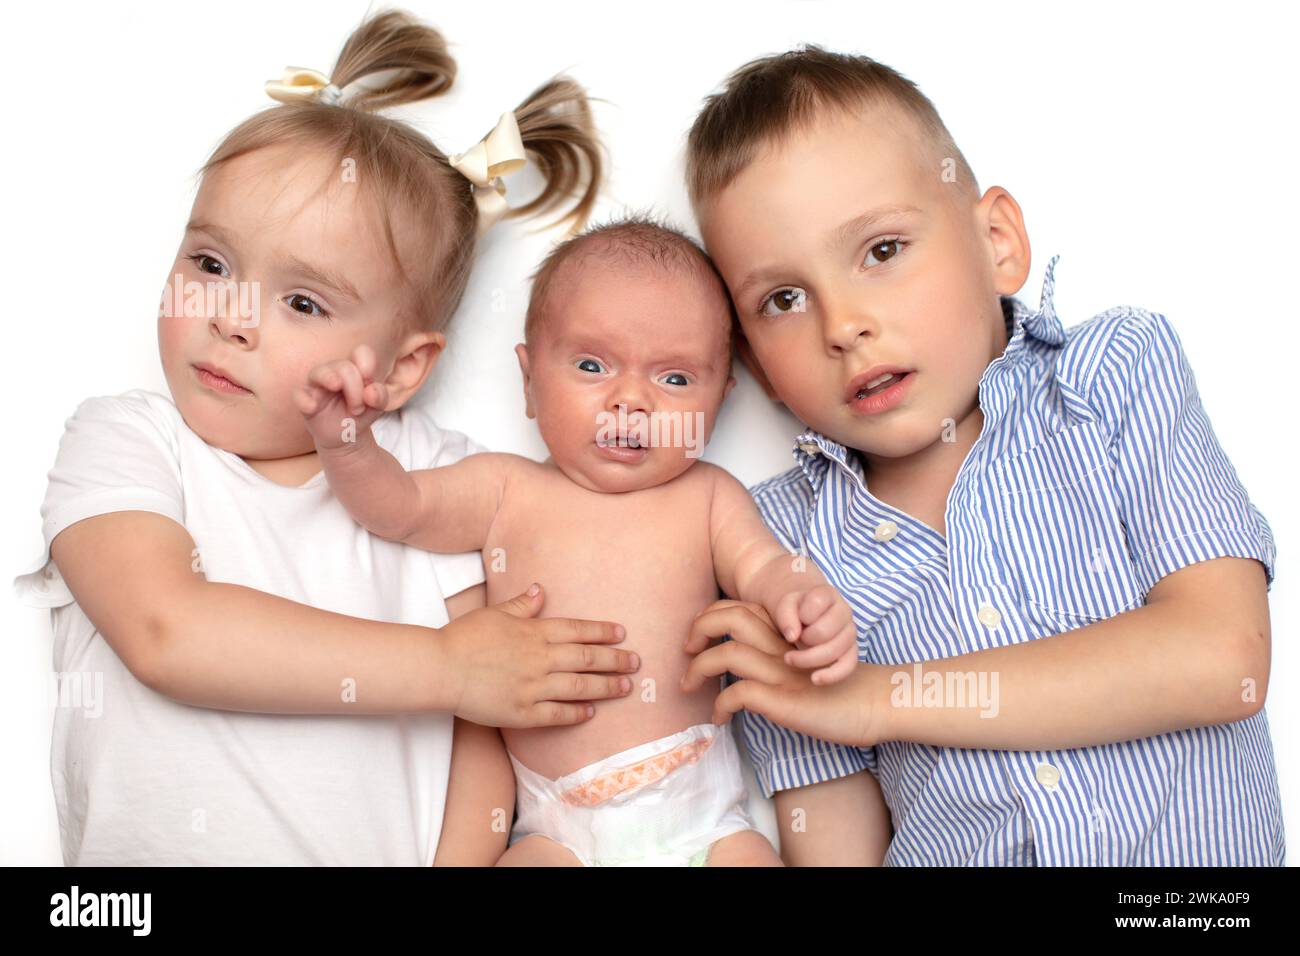 Brother and sister lie together with a newborn baby. Three small children of different ages. Children in the family. Stock Photo